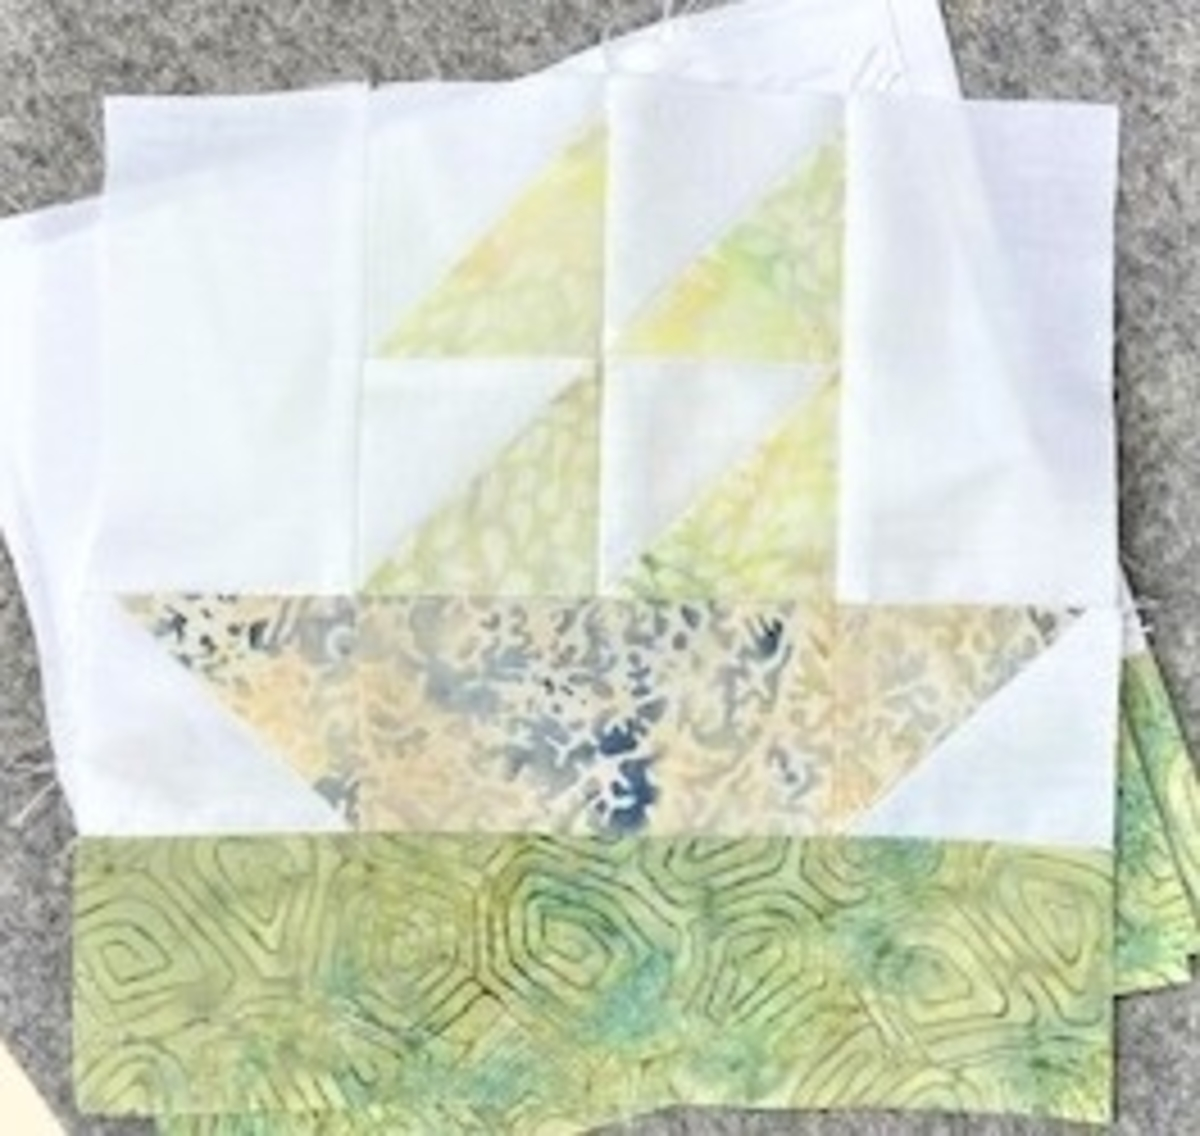 pieced sailboat quilt block made with accuquilt go! mix & match qube 8" and island batik green, yellow and solid white fabrics